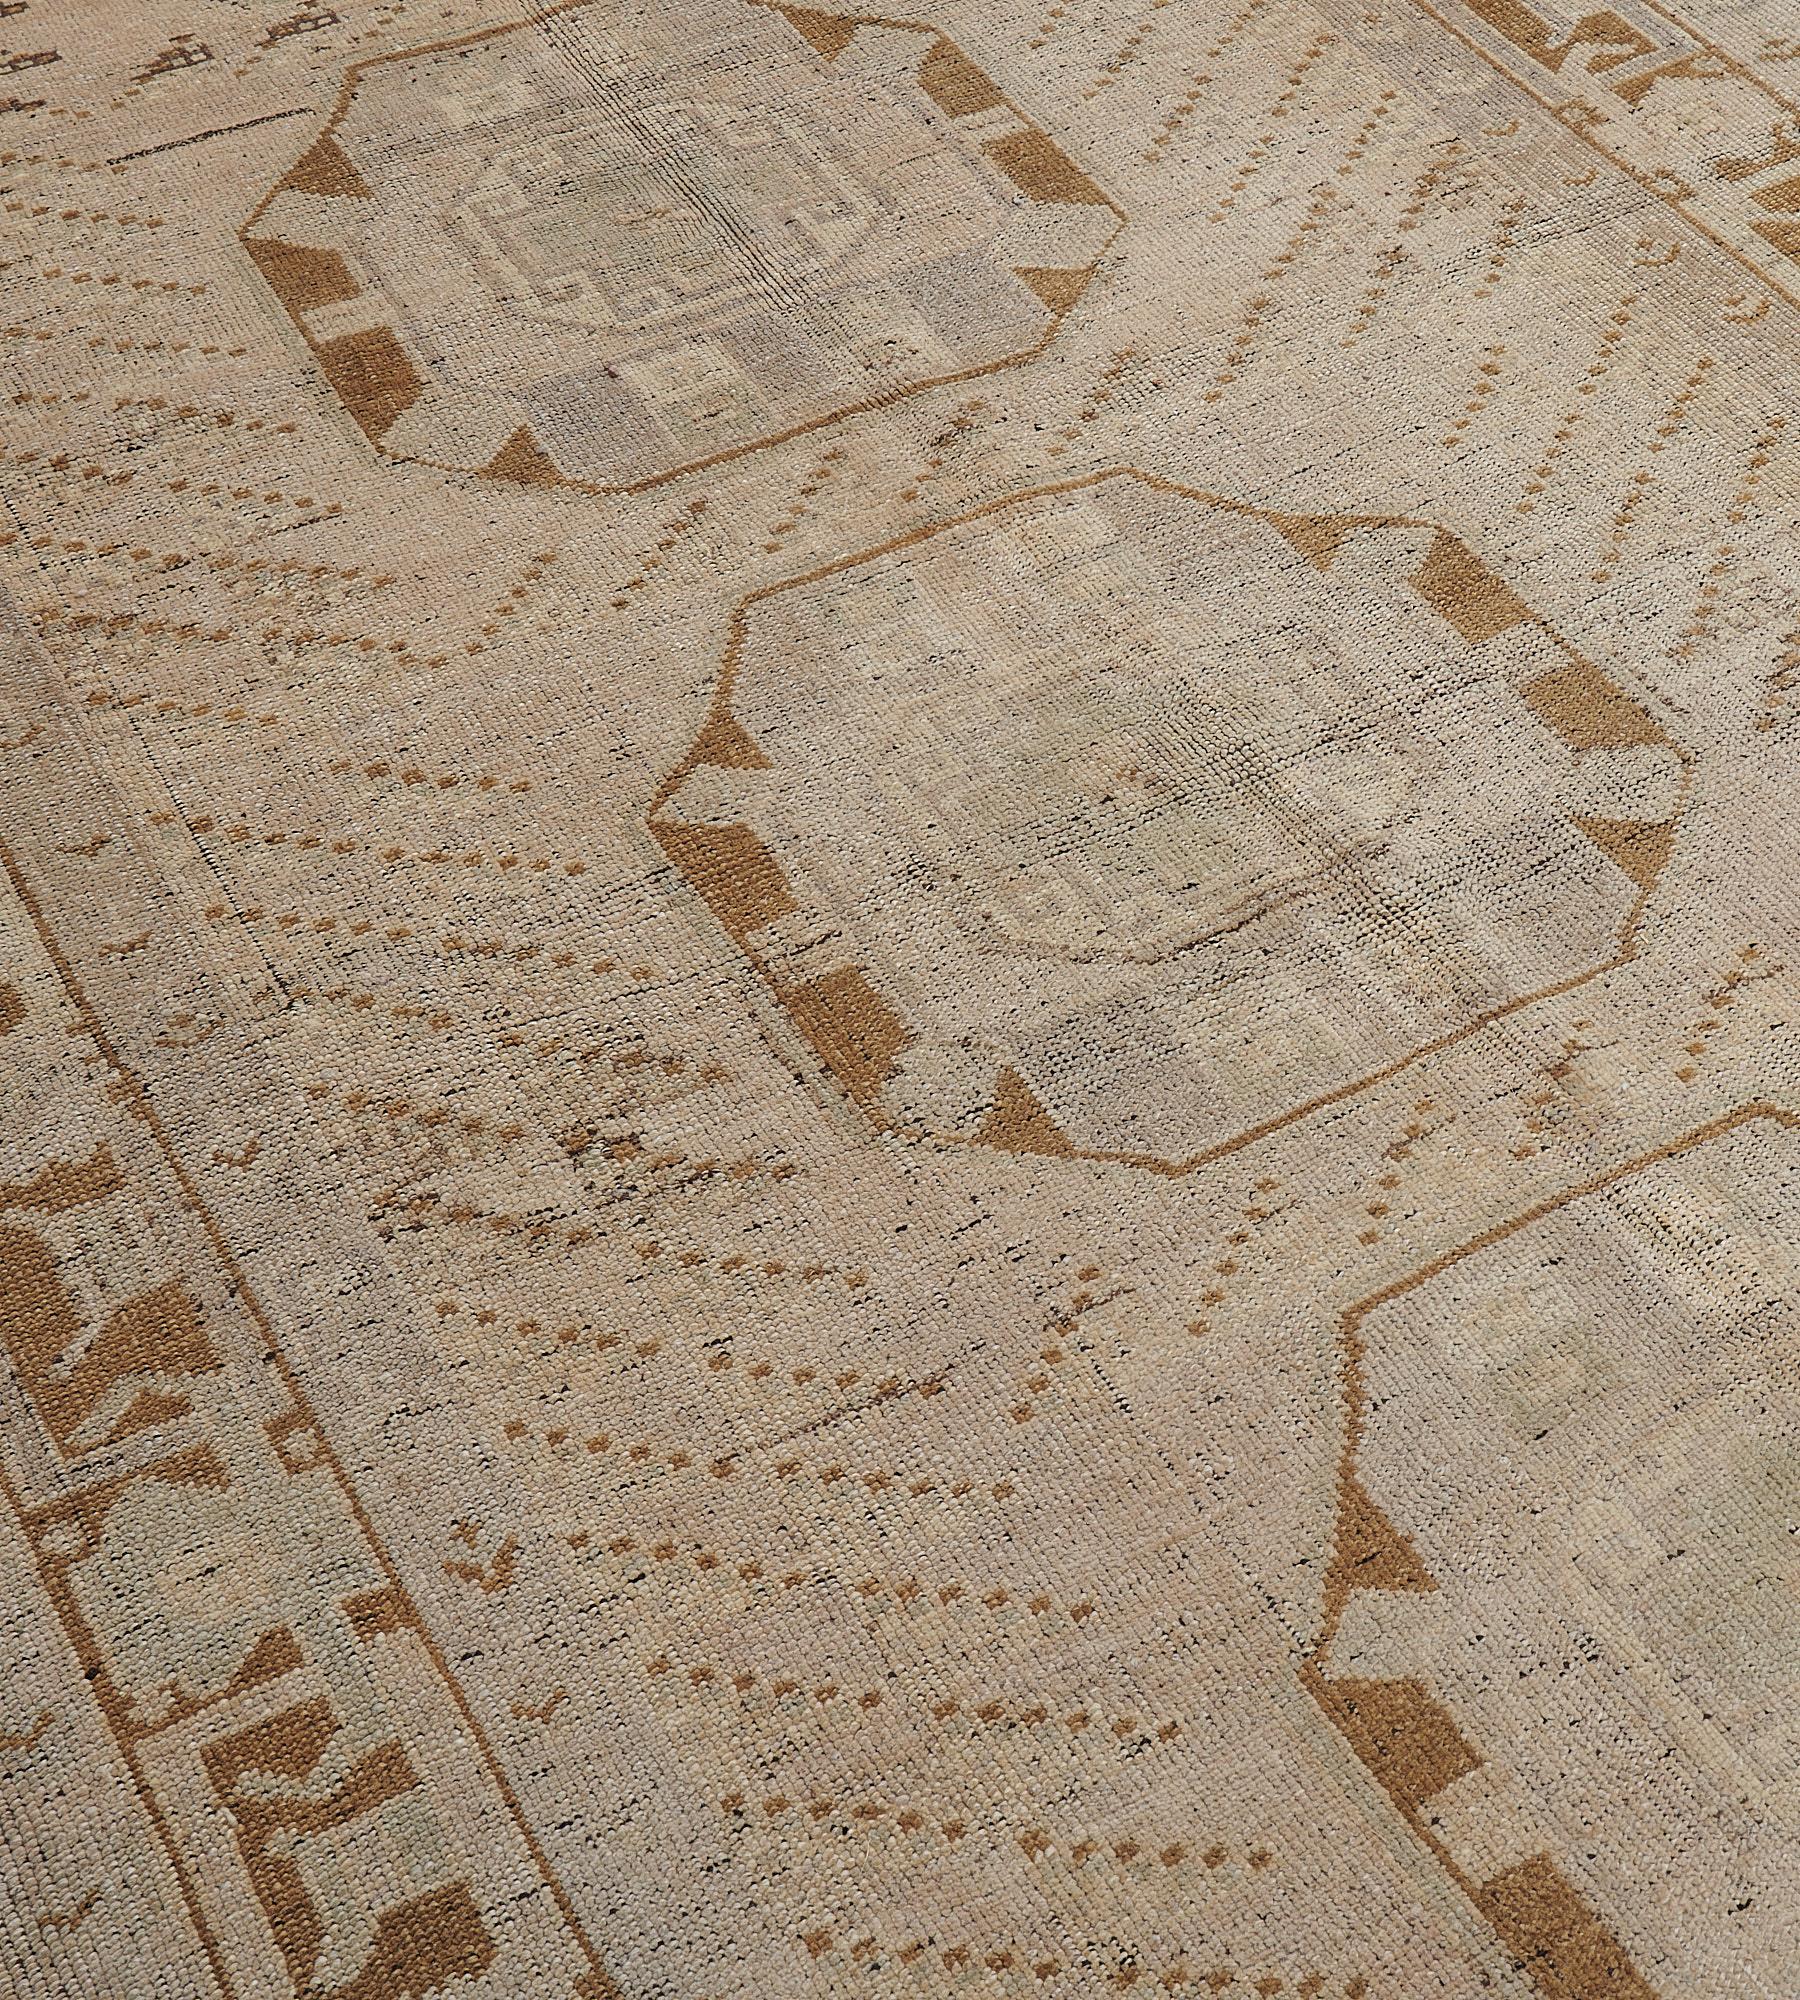 This vintage hand-woven Turkish Anatolian rug has a beige field of diagonal rows of geometric motif with central column of octagonal lozenge medallions, in a golden brown geometric rosette vine border.